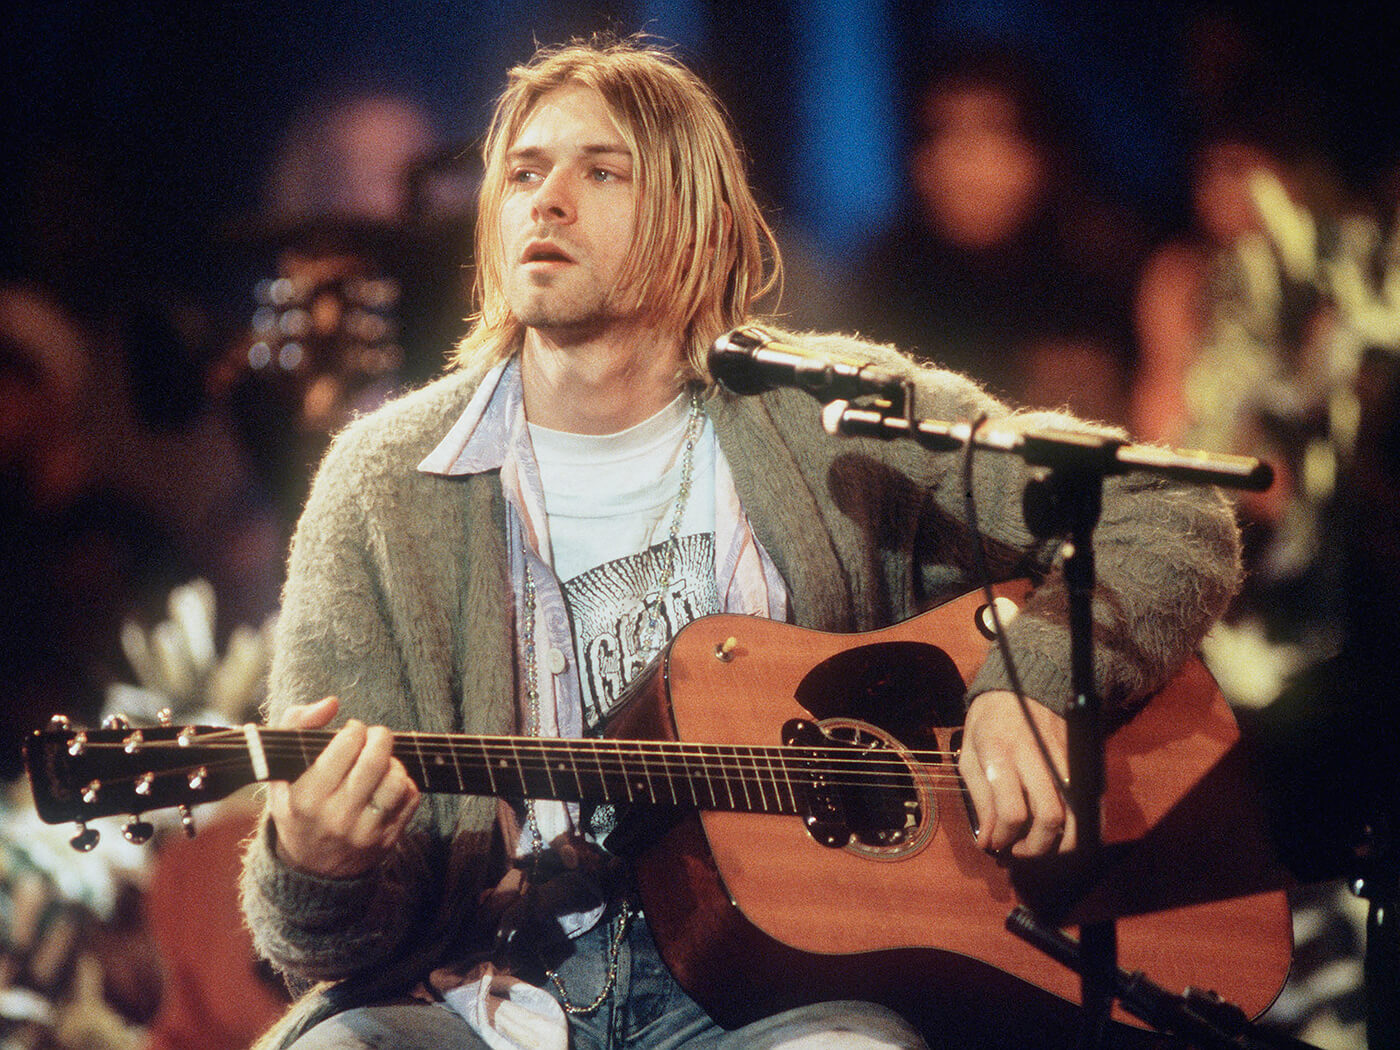 Kurt Cobain performing with his Martin D-18E during Nirvana‘s MTV Unplugged, photo by Frank Micelotta Archive/Getty Images